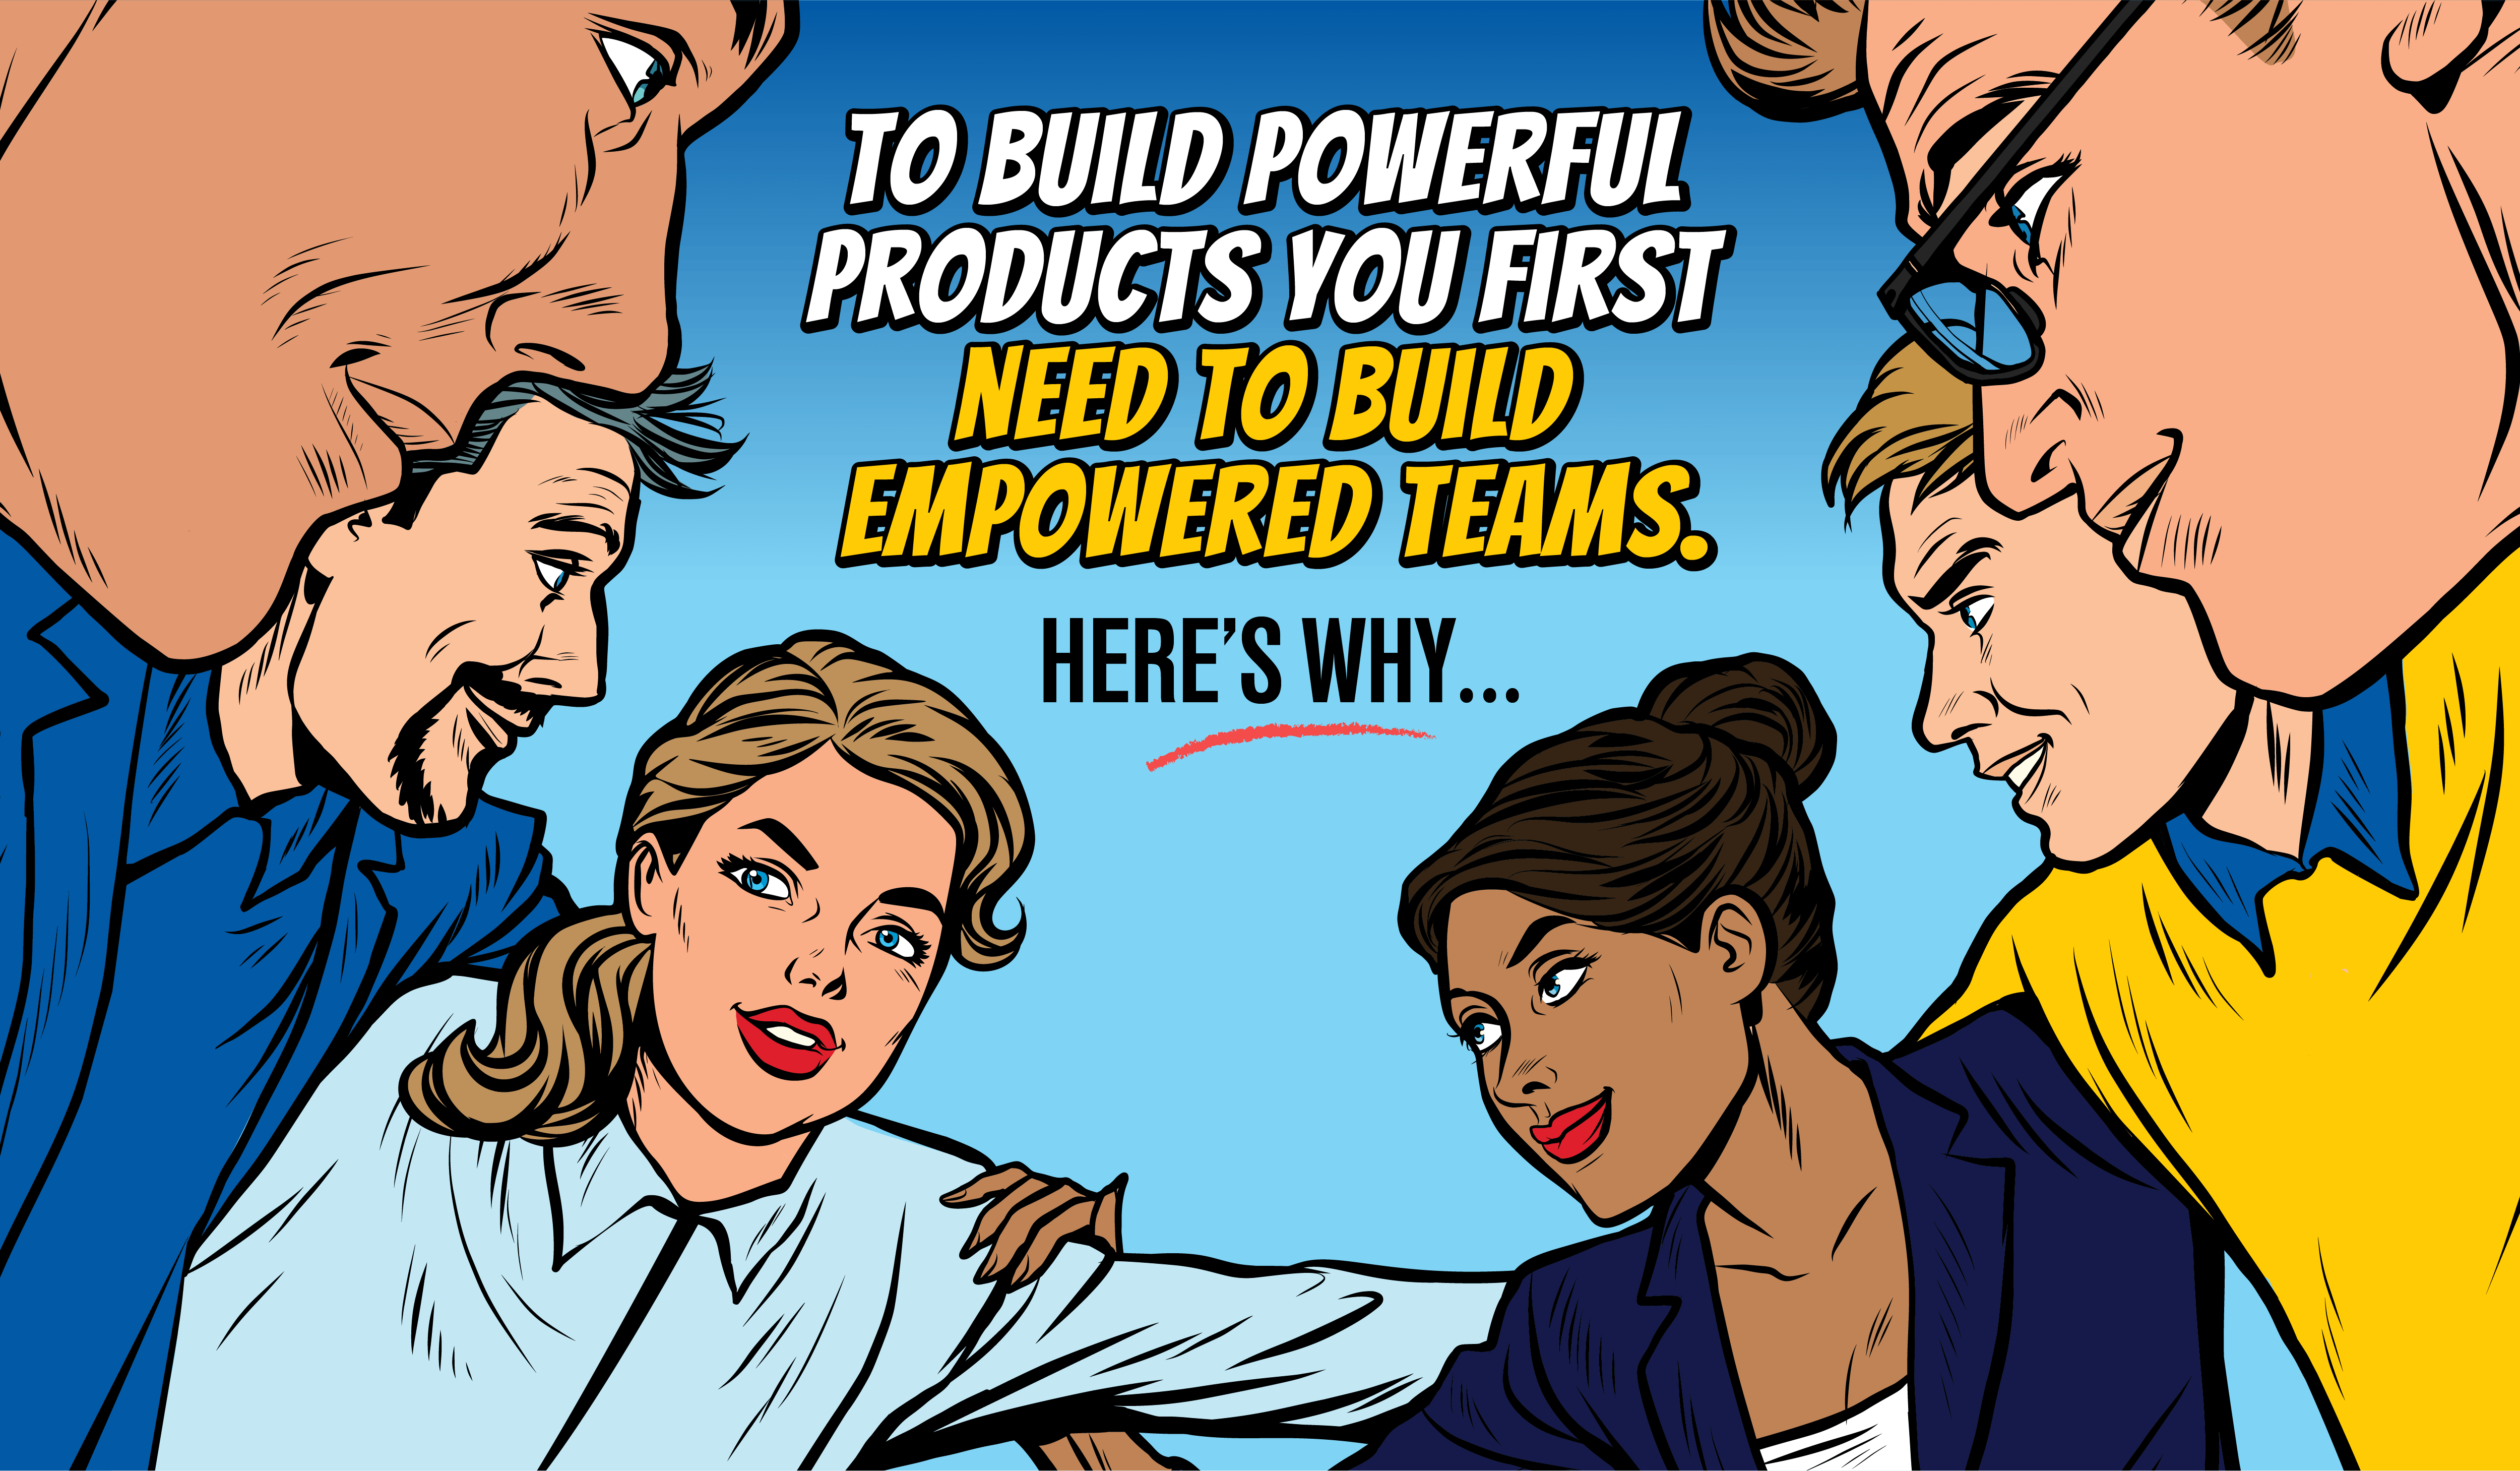 Empowered teams